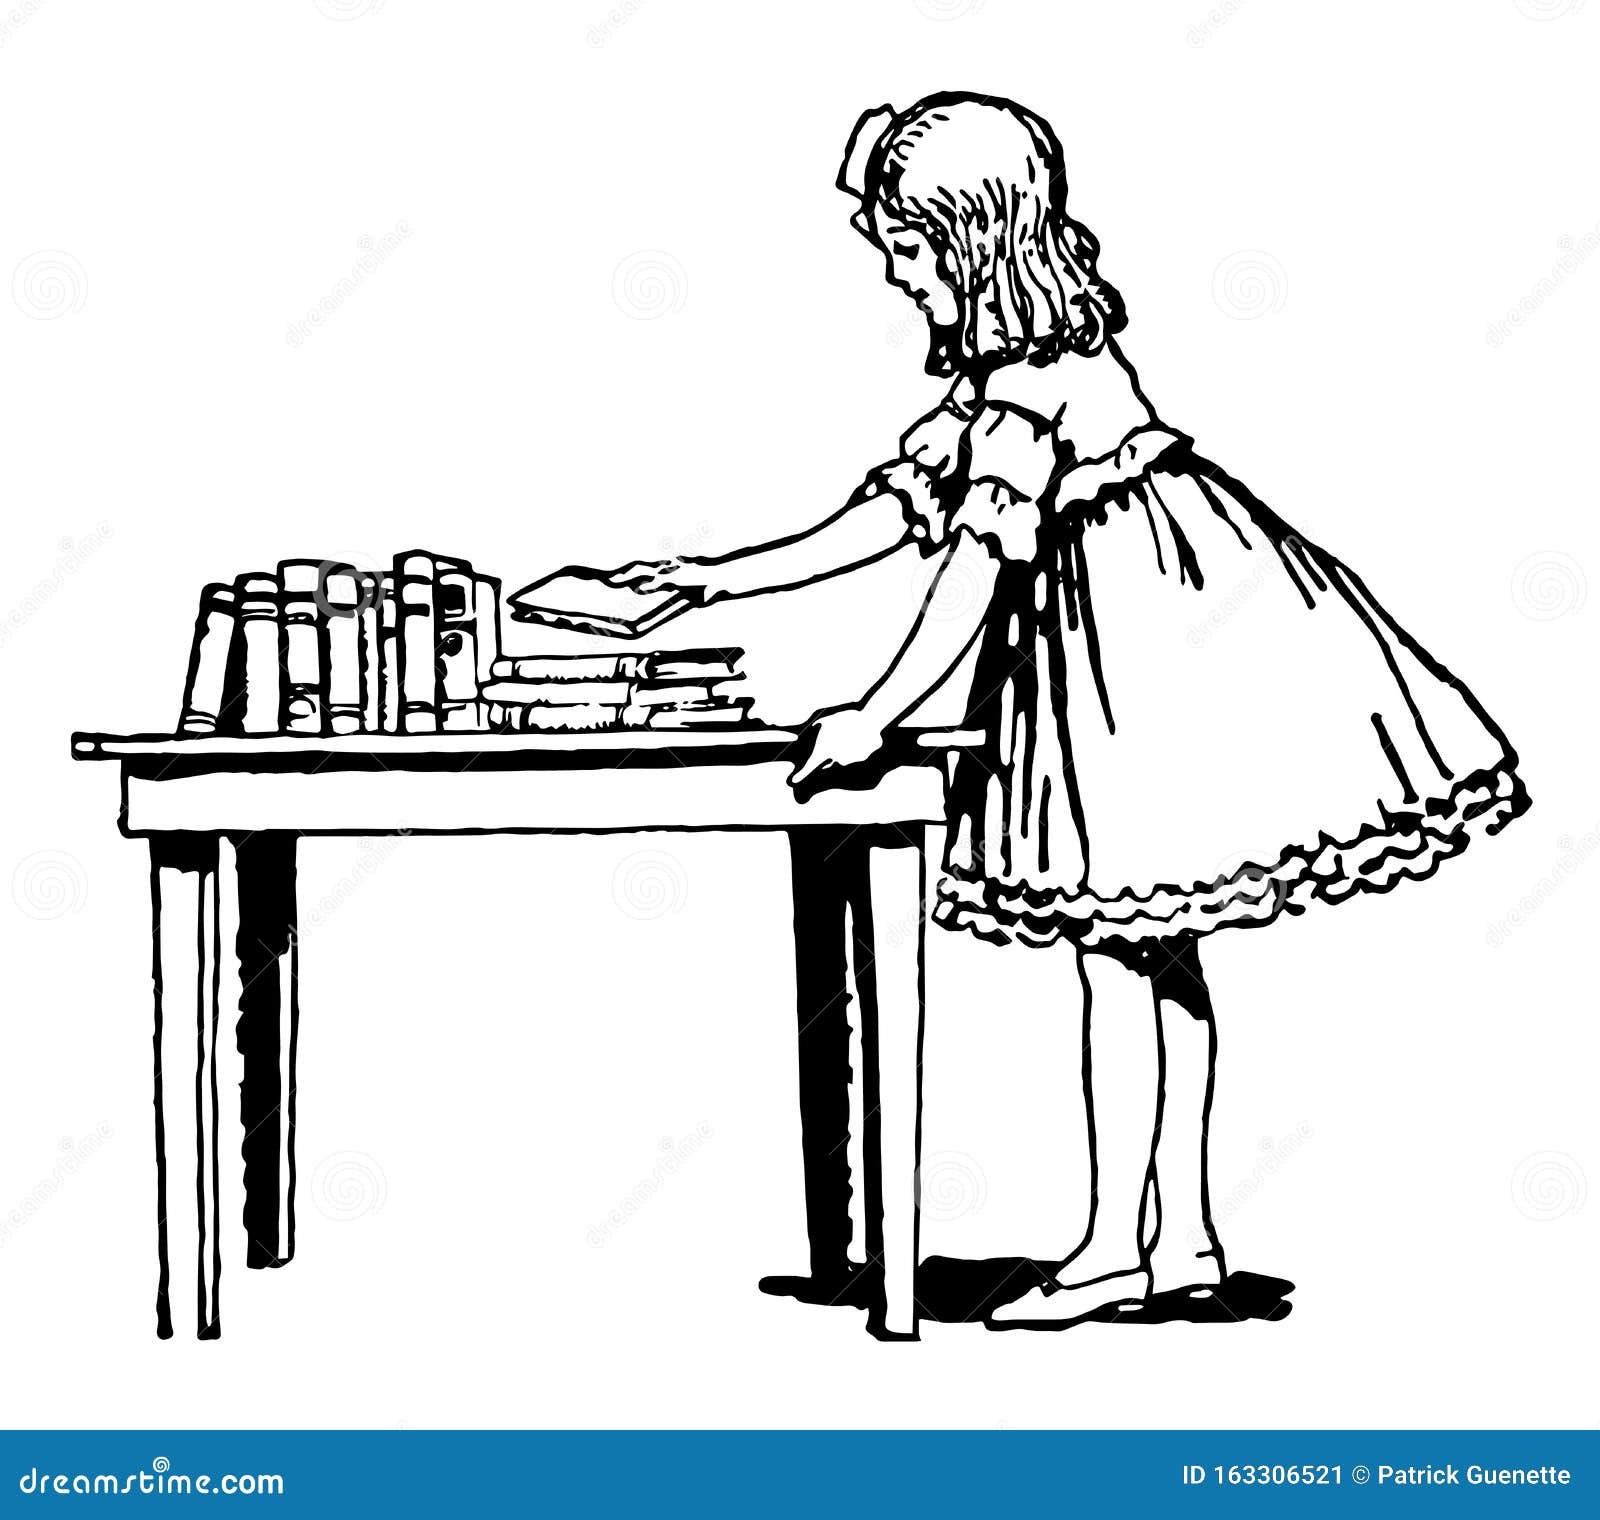 girl placing books on table,  counter, vintage engraving